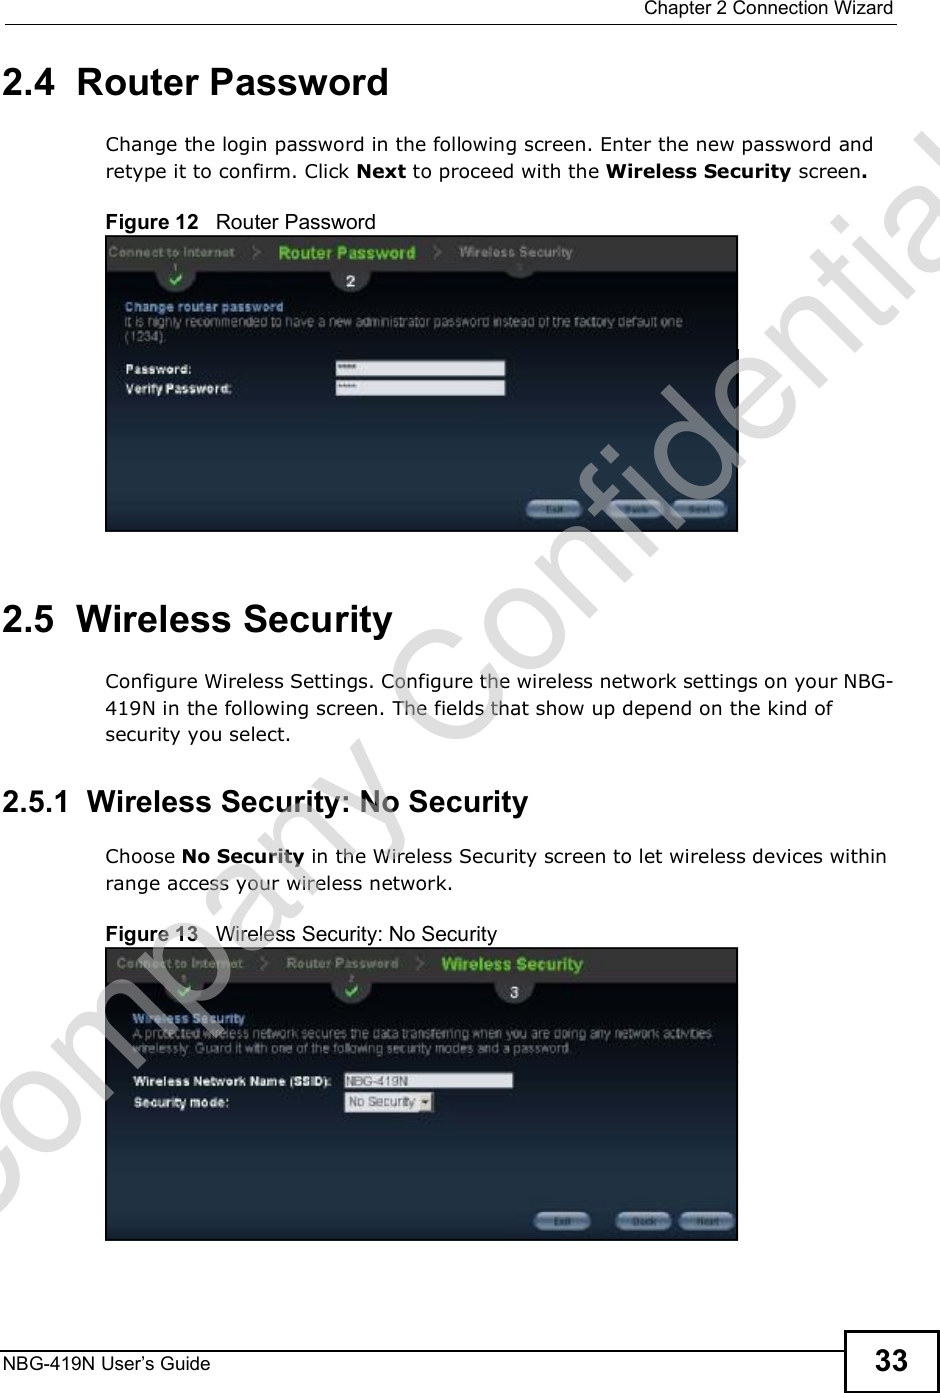  Chapter 2Connection WizardNBG-419N User s Guide 332.4  Router PasswordChange the login password in the following screen. Enter the new password and retype it to confirm. Click Next to proceed with the Wireless Security screen.Figure 12   Router Password  2.5  Wireless SecurityConfigure Wireless Settings. Configure the wireless network settings on your NBG-419N in the following screen. The fields that show up depend on the kind of security you select.2.5.1  Wireless Security: No SecurityChoose No Security in the Wireless Security screen to let wireless devices within range access your wireless network.Figure 13   Wireless Security: No Security Company Confidential